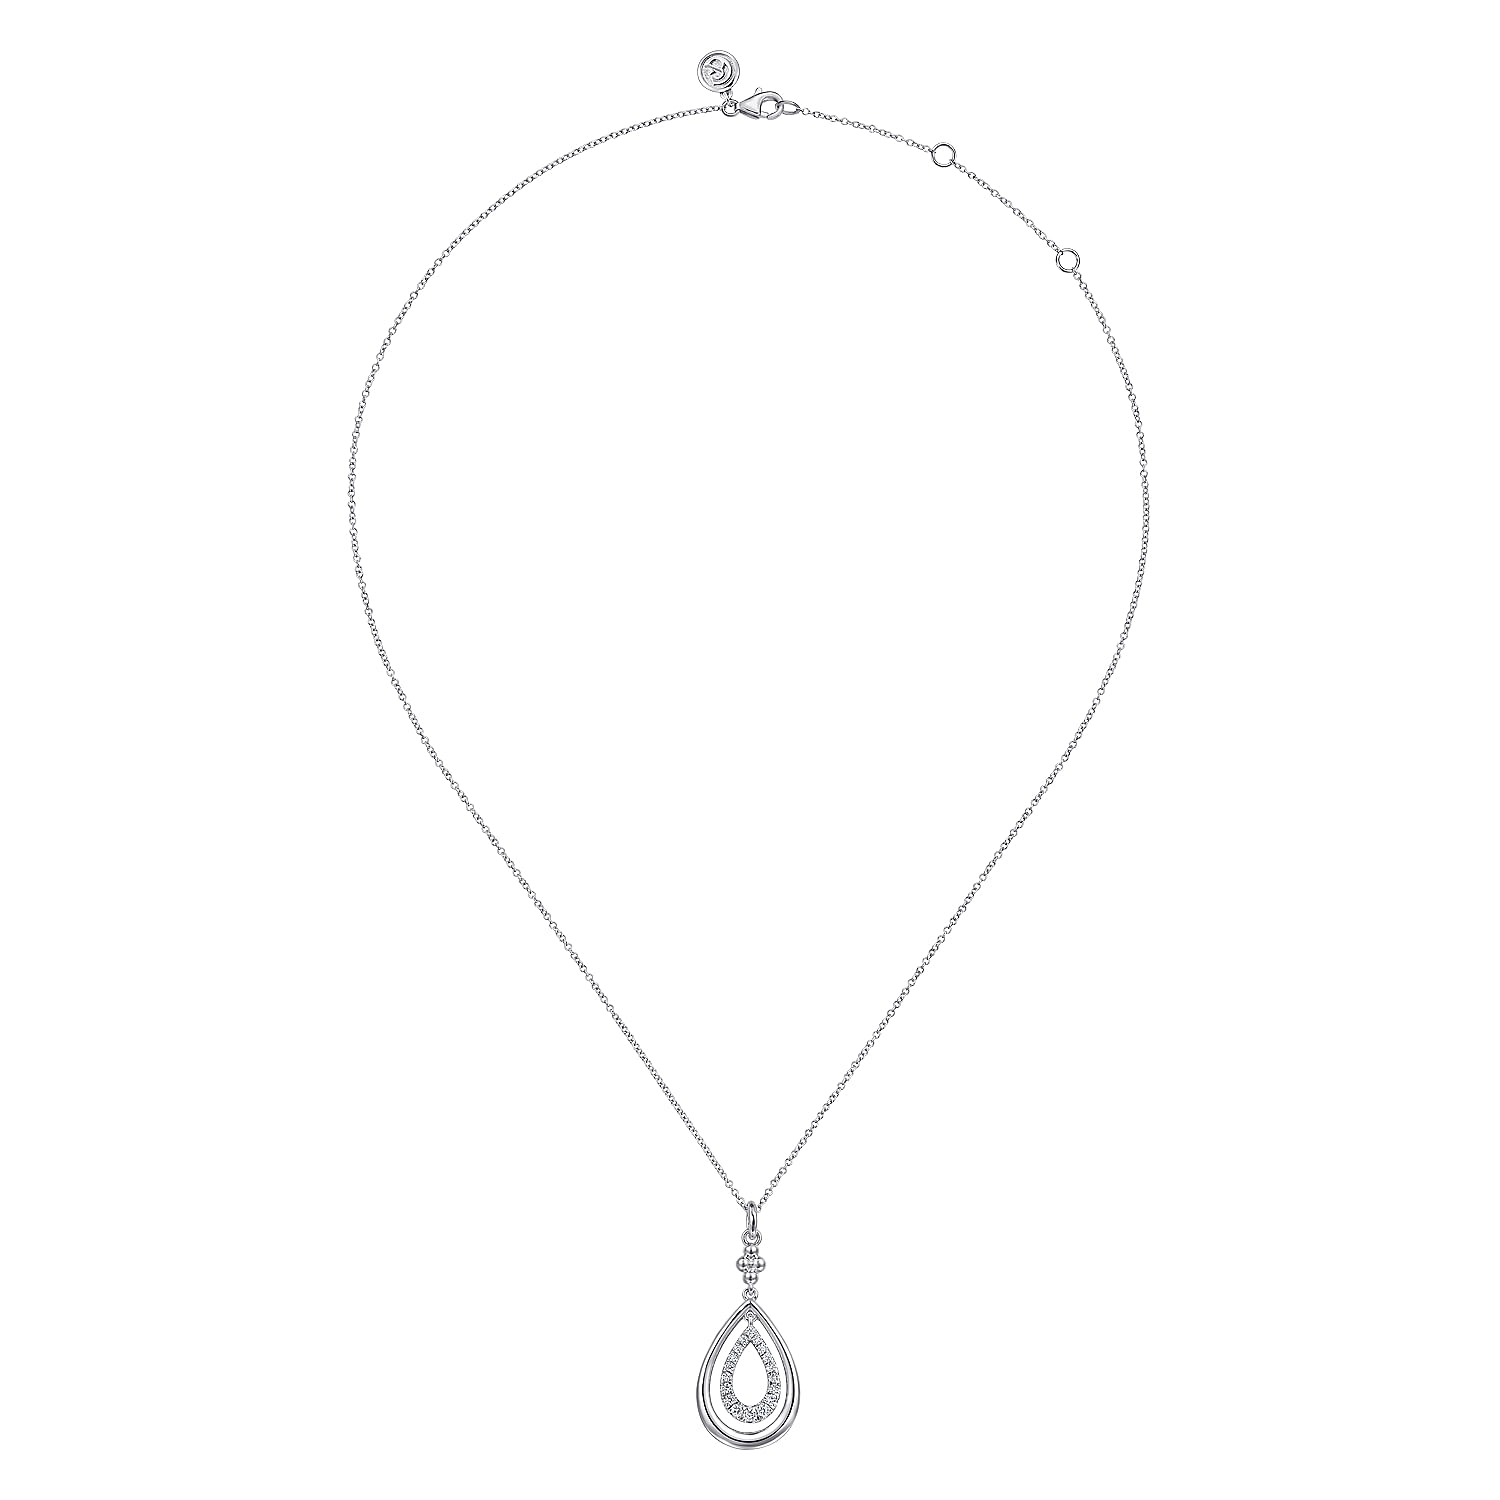 925 Sterling Silver White Sapphire Bujukan Pear Drop Pendant Necklace
